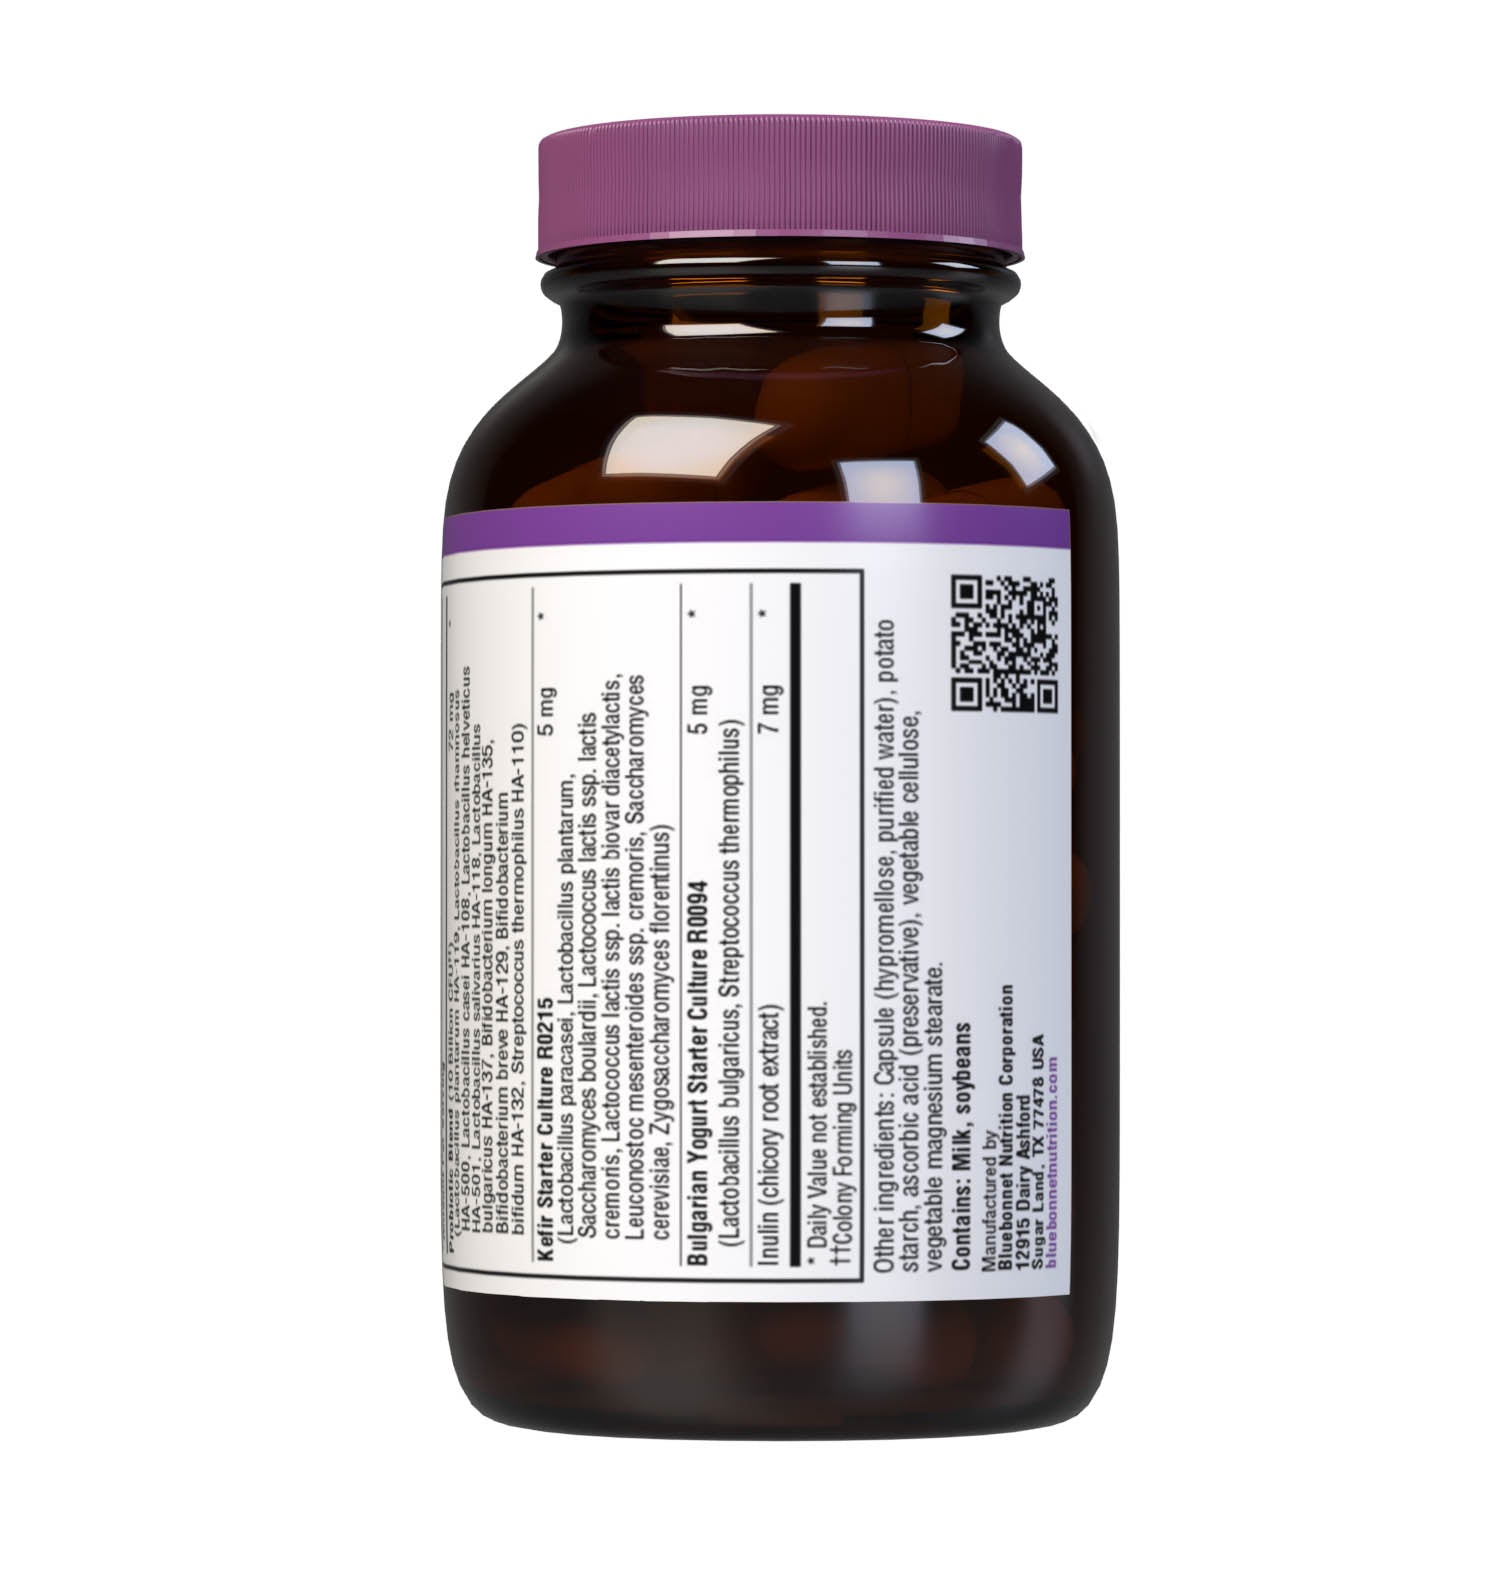 Bluebonnet’s Probiotic & Prebiotic 30 Vegetable Capsules are formulated with 10 billion viable cultures from 20 DNA-verified, scientifically supported strains. This unique, science-based probiotic formula includes the prebiotic inulin from chicory root extract, to assist the growth of friendly bacterium in the gut. Supplement facts panel 2. #size_30 count